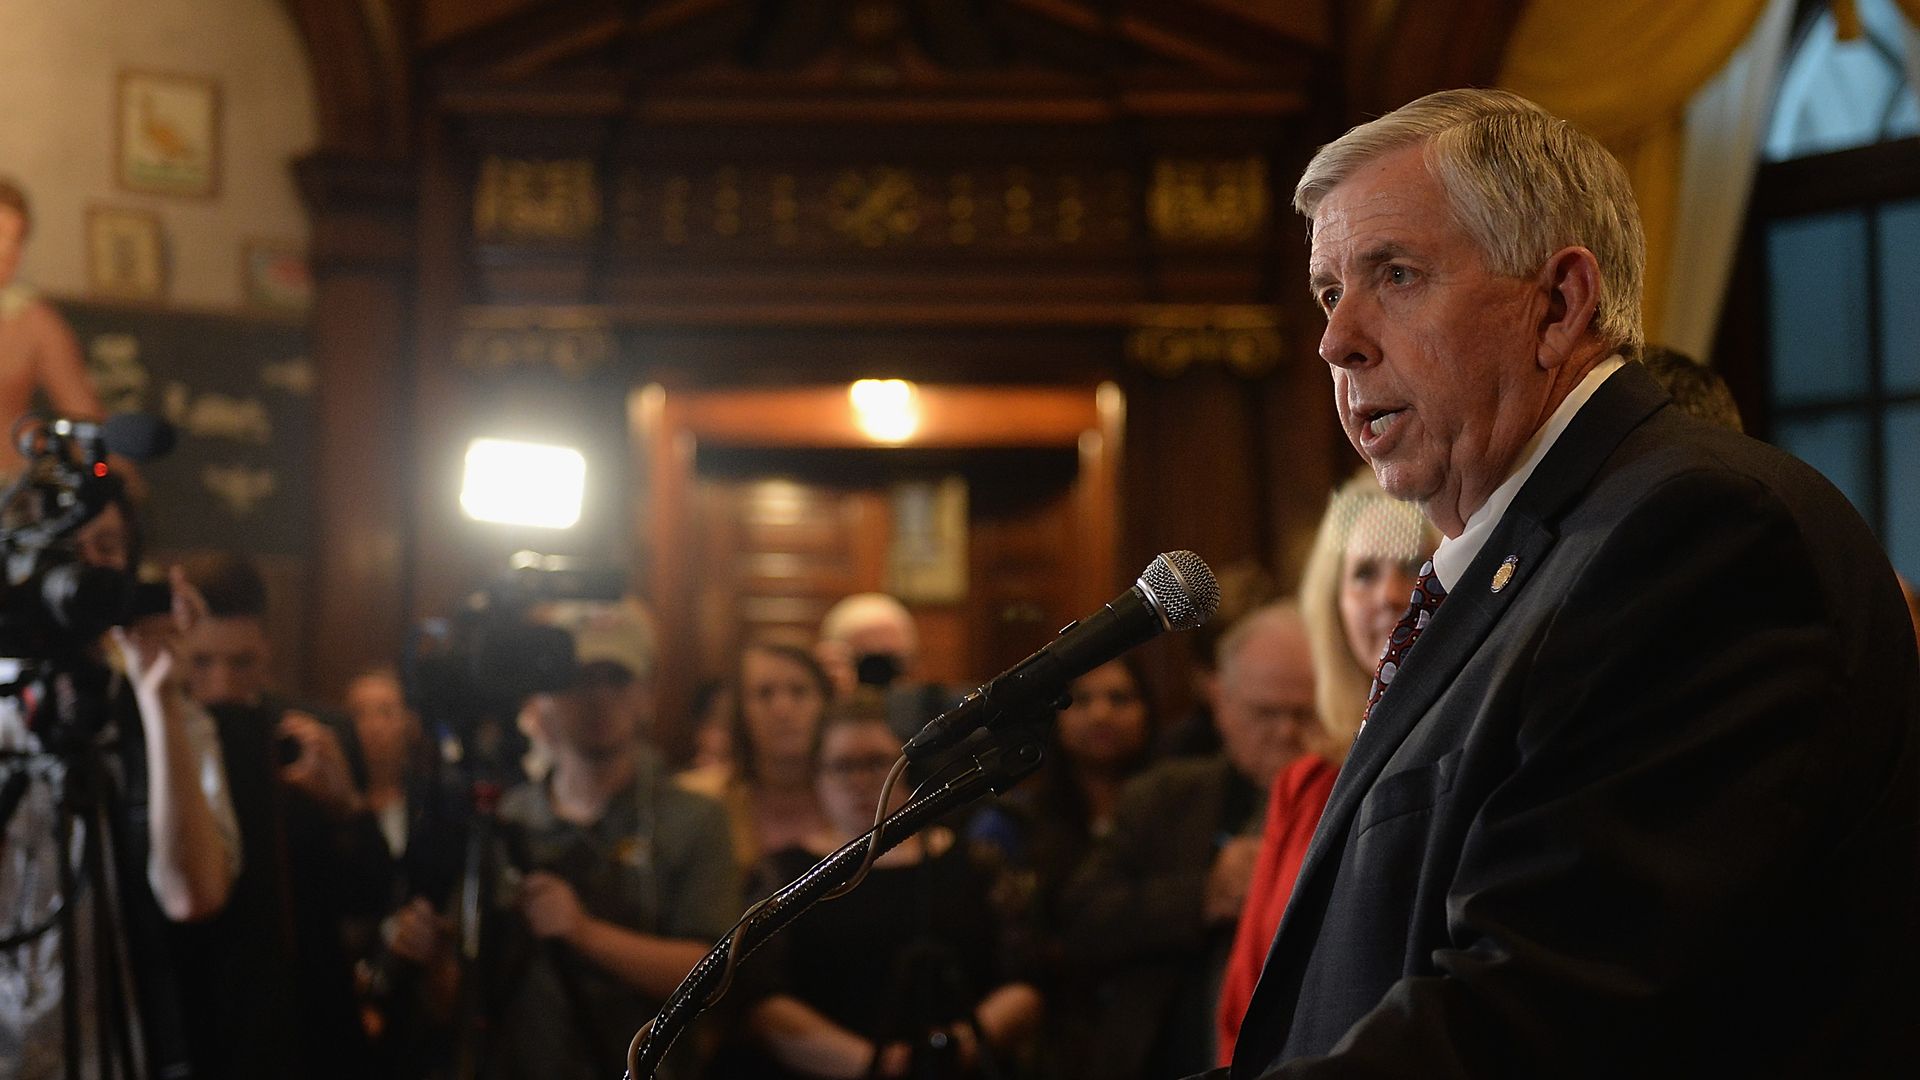 Missouri Governor Mike Parson addresses the media on the last day of legislative session at the Missouri State Capitol Building on May 17, 2019